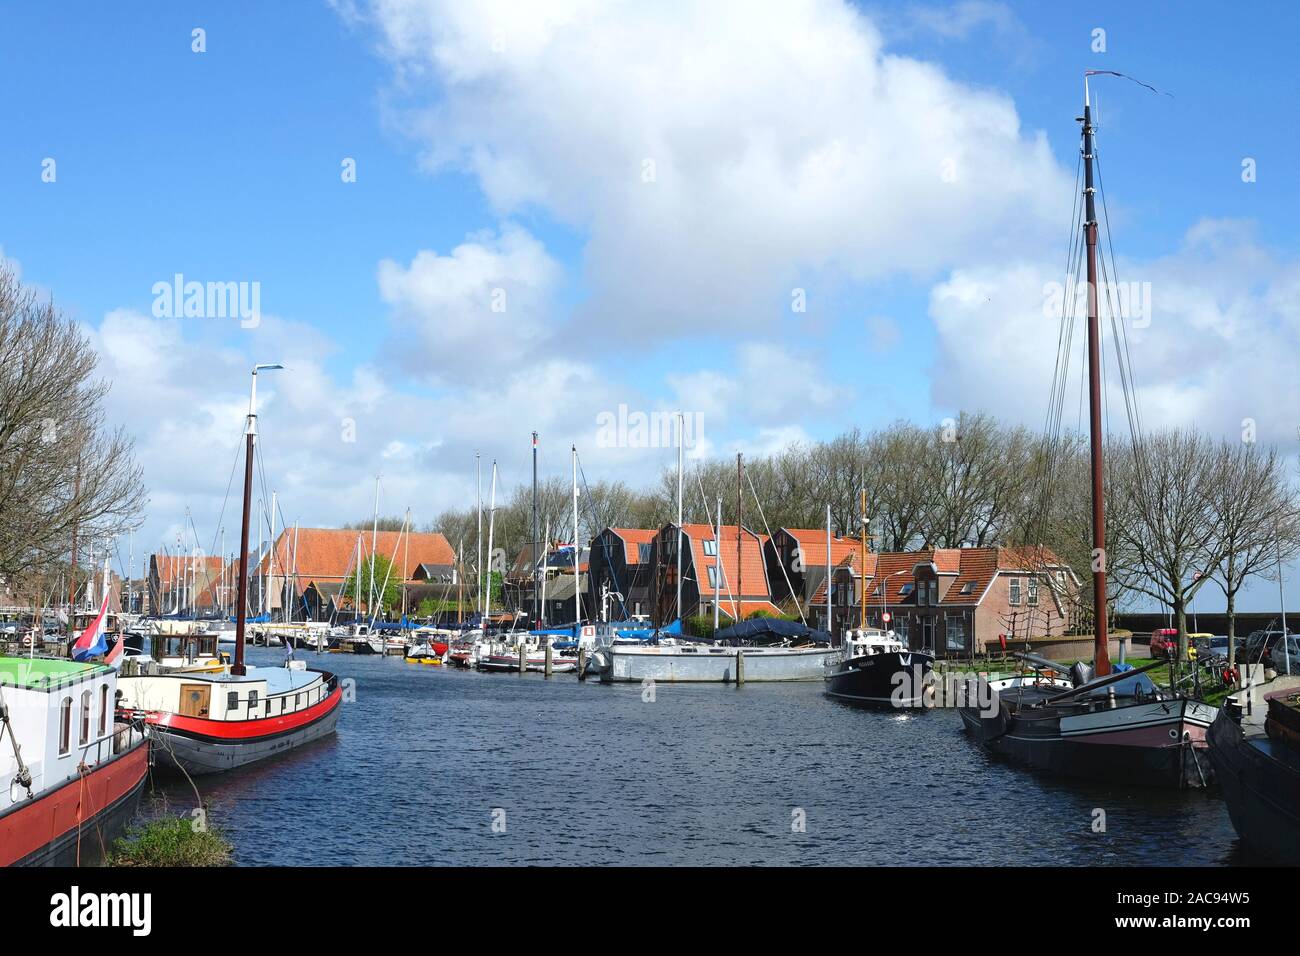 Enkhuizen, North Holland / Netherlands - April 14, 2014: Yachs near the pier in little city harbor of Enkhuizen, Netherlands. Stock Photo